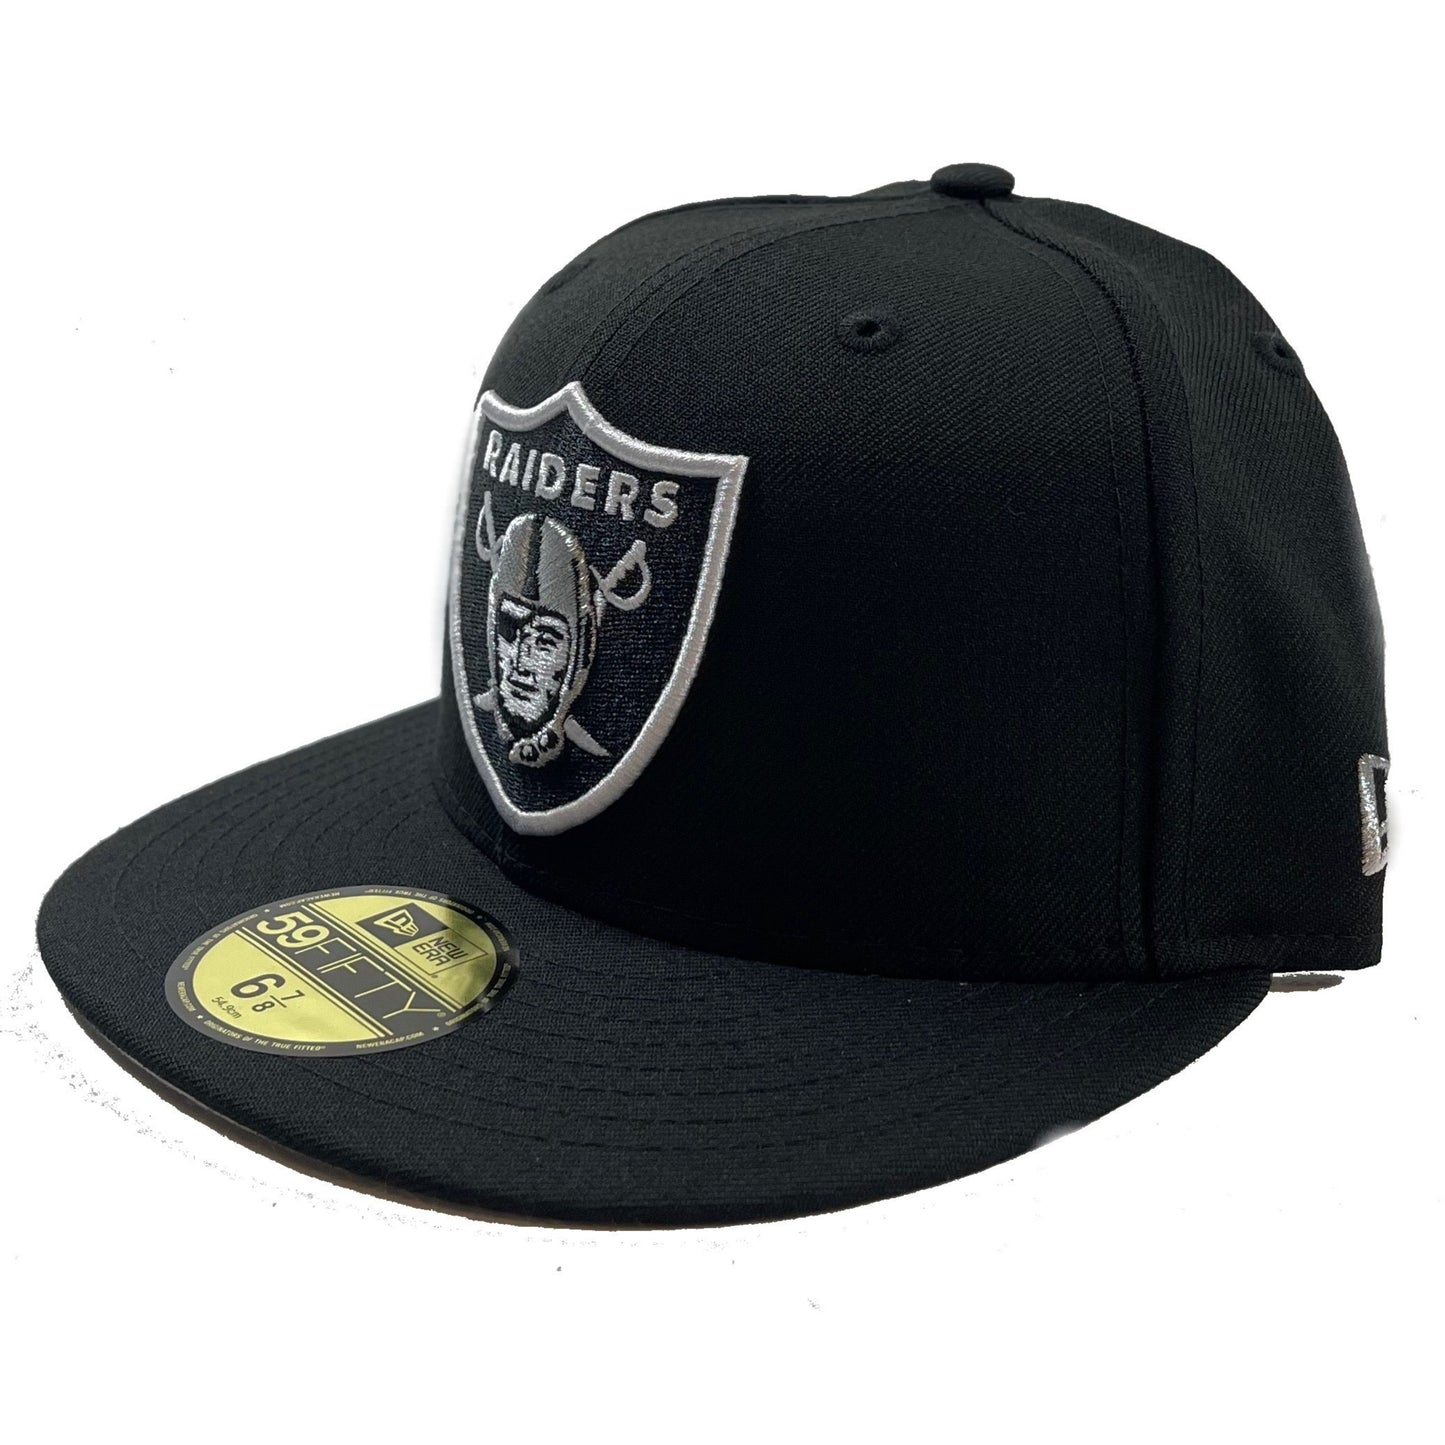 Raiders (Black) Fitted